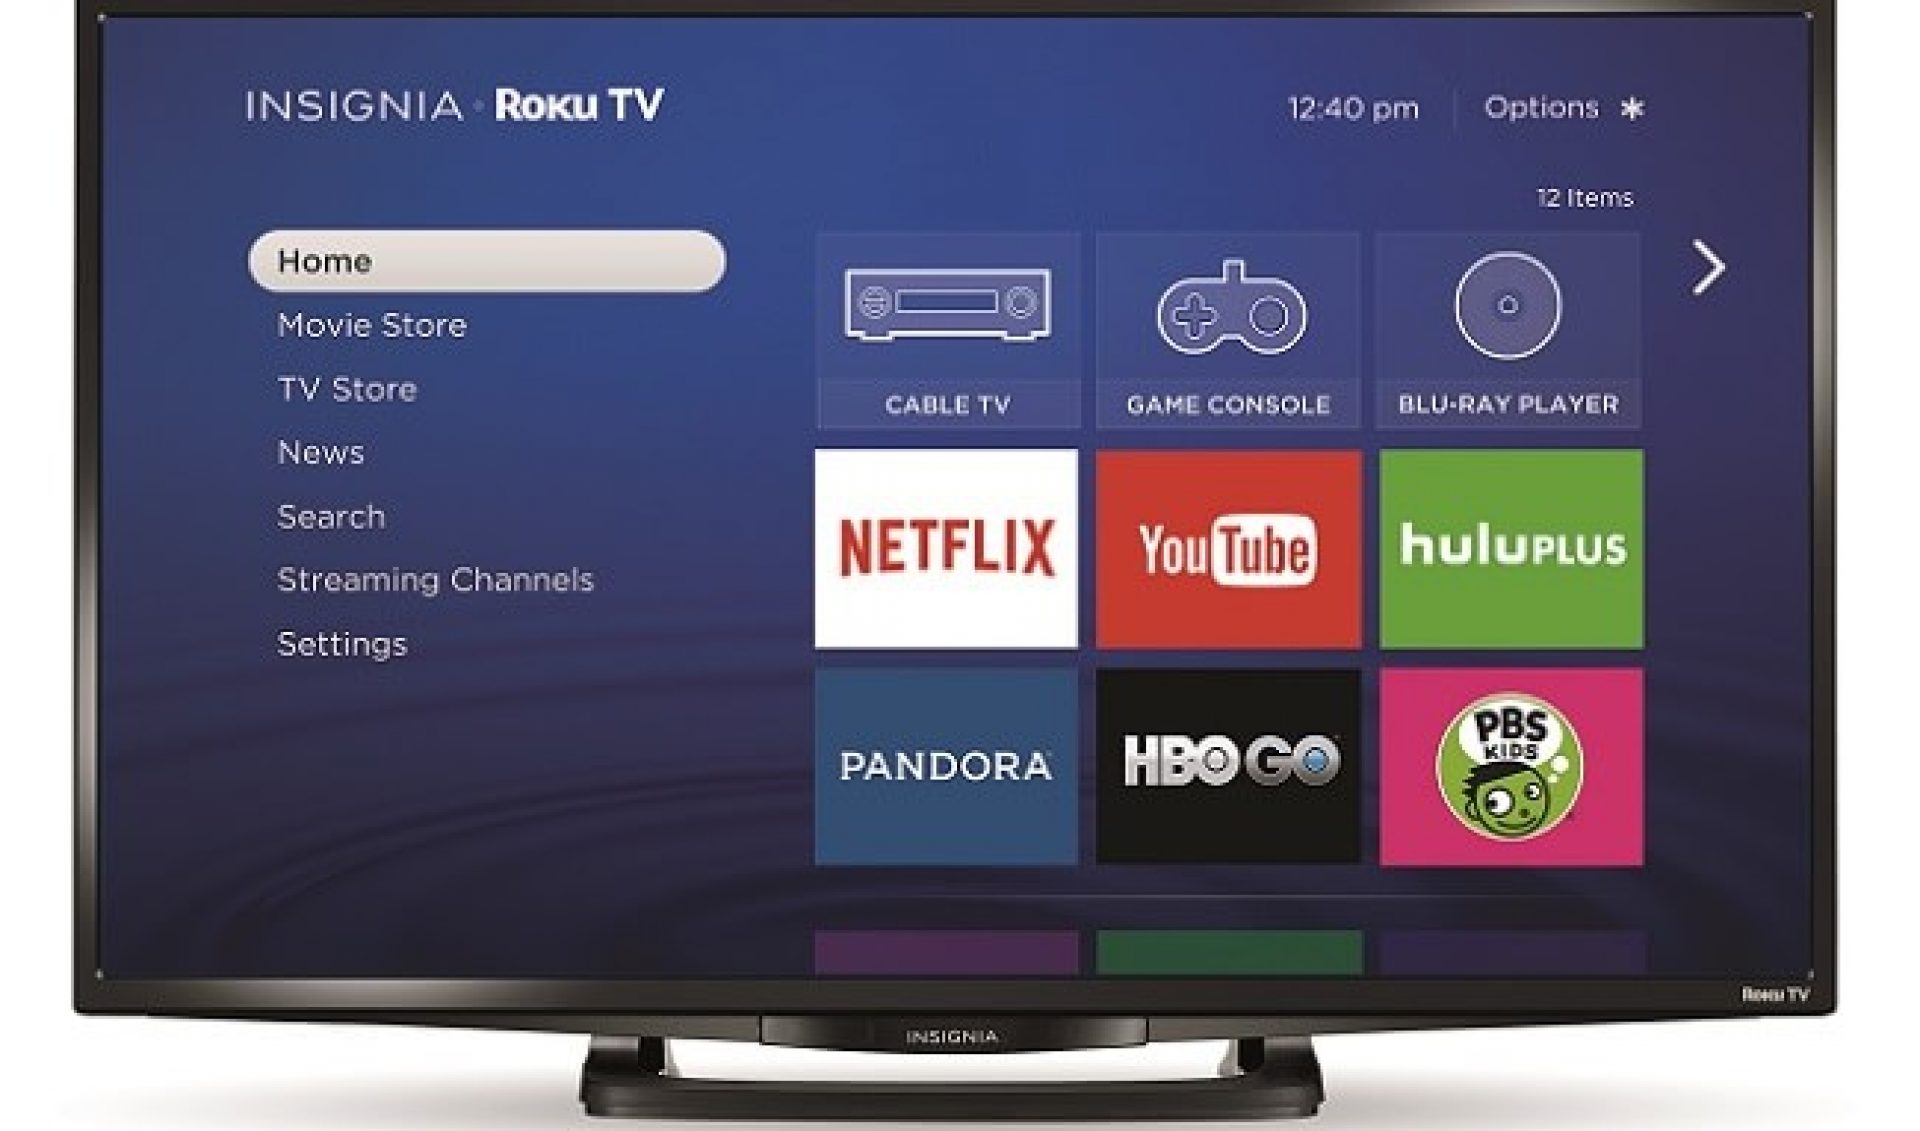 Roku Reveals New TV Models, Aims For 4K Streaming With Netflix